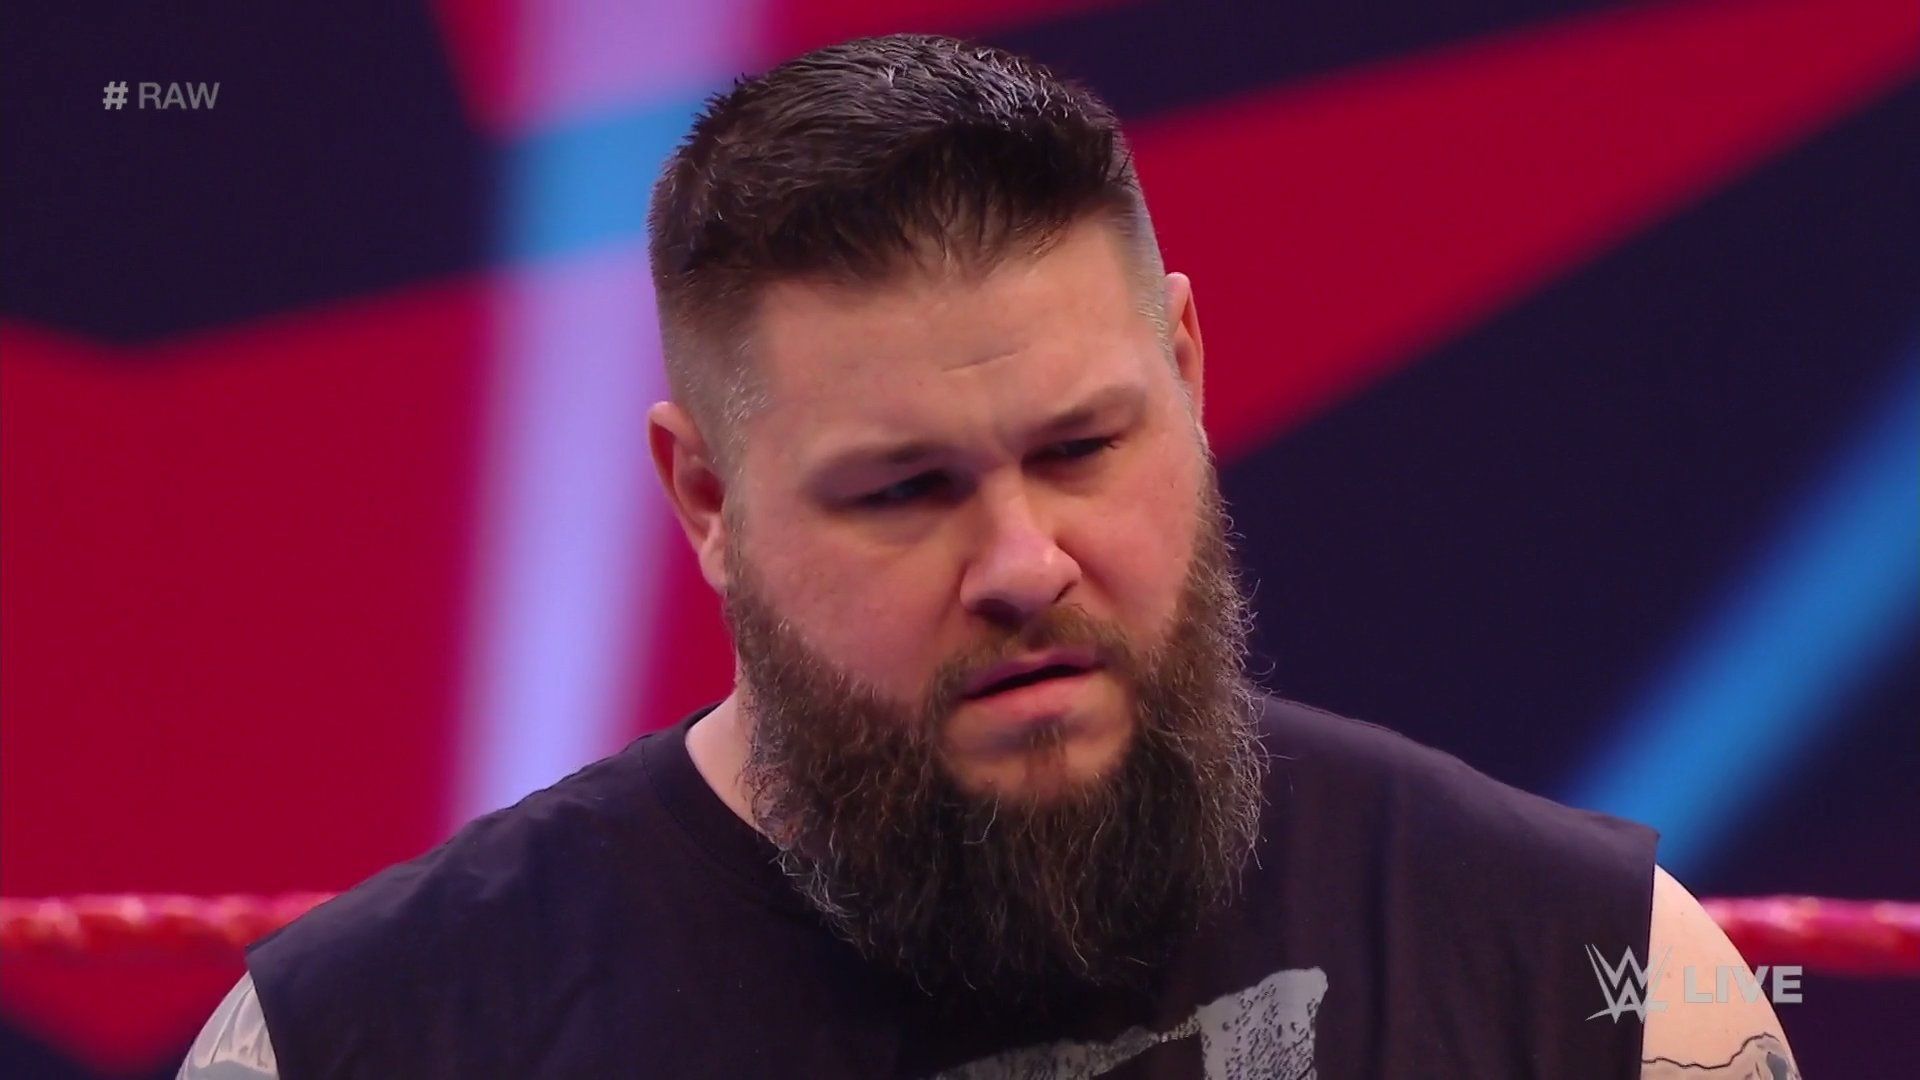 Kevin Owens competed in the main event of WWE